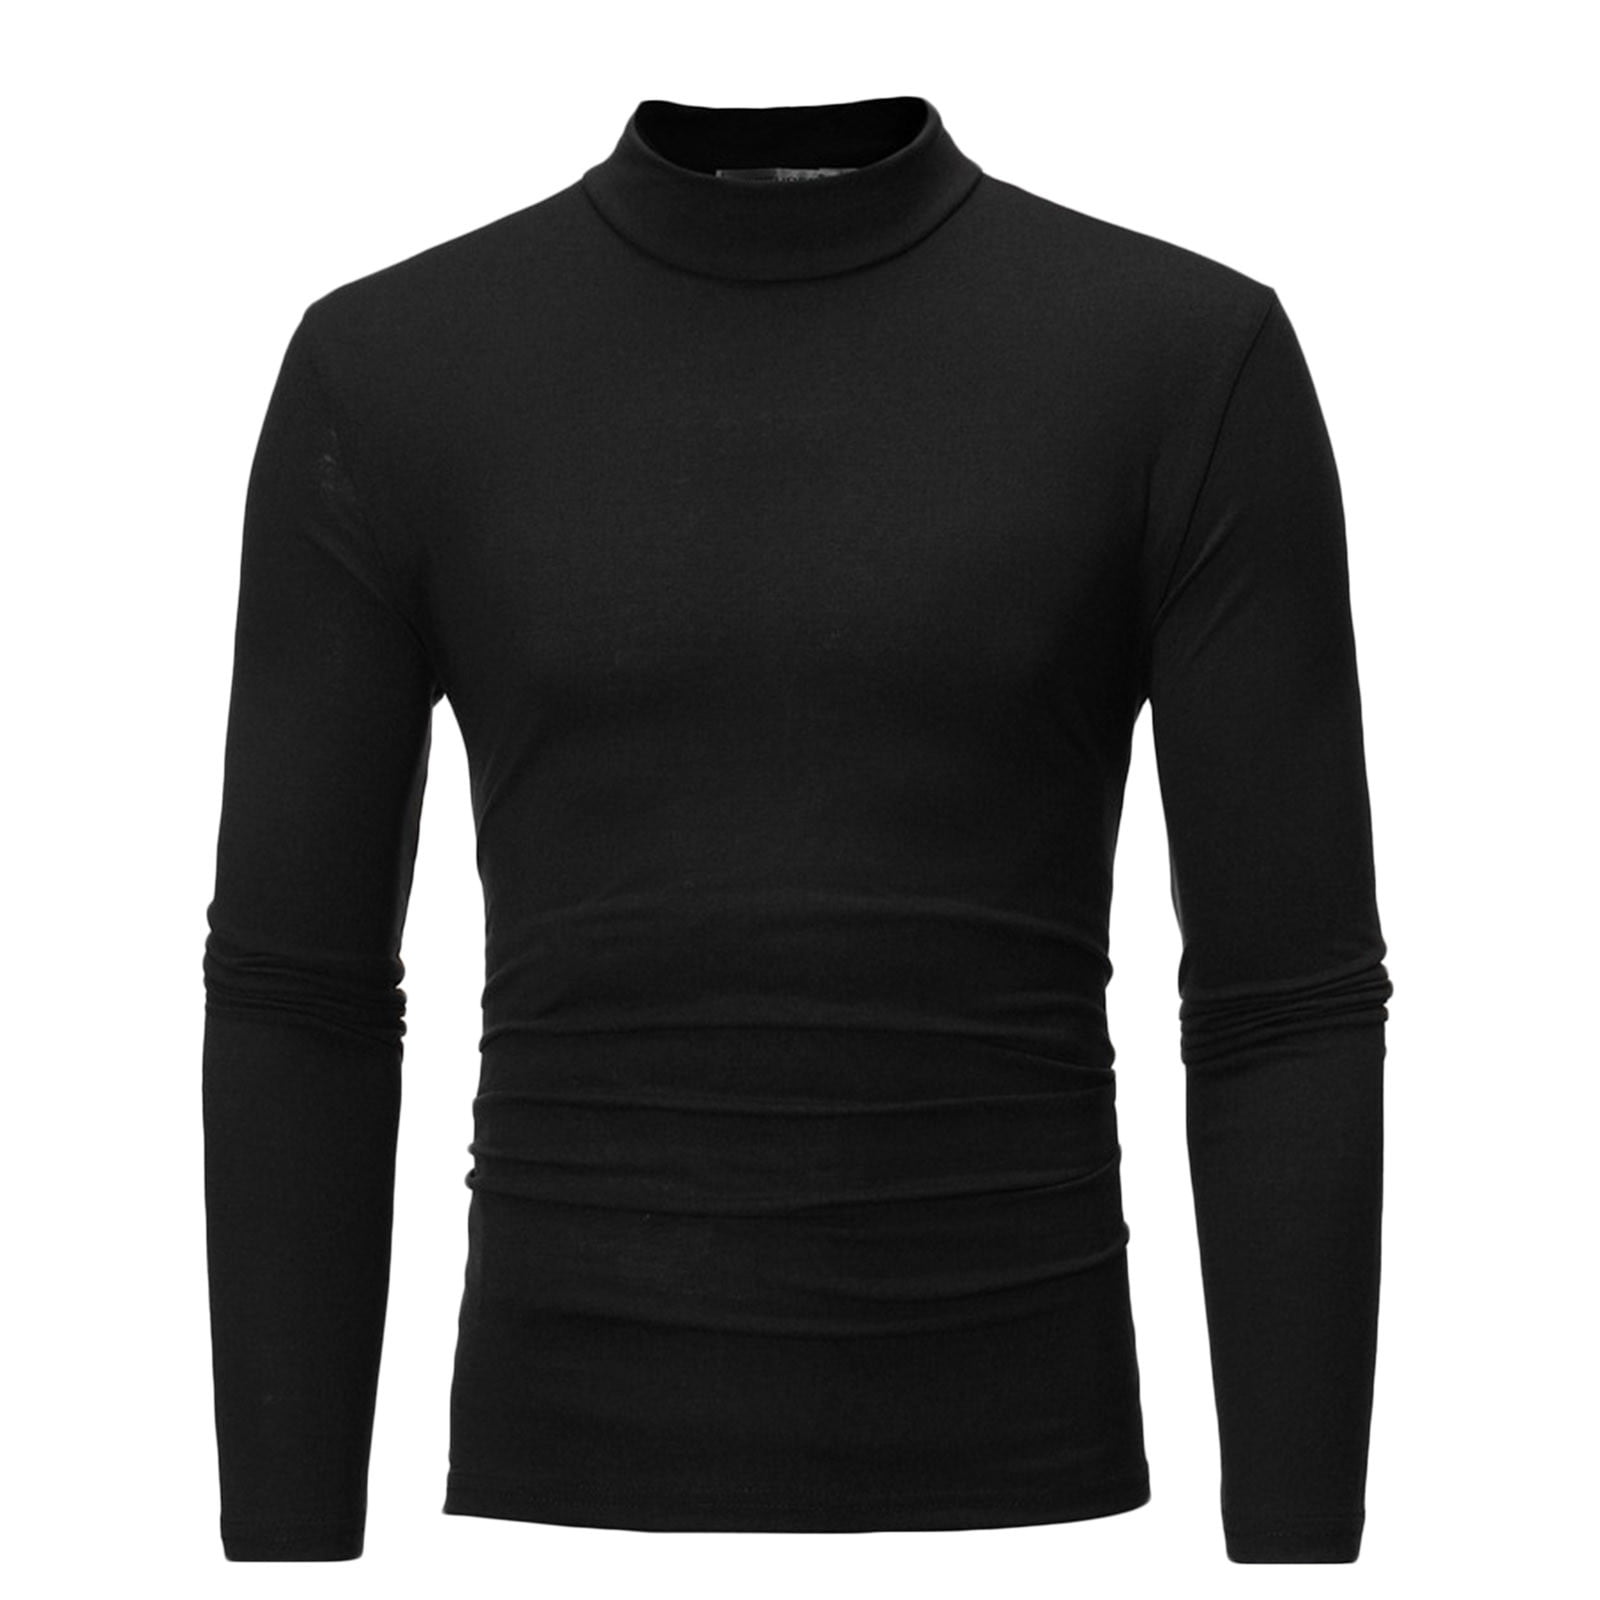 Clearance Men's Thermal Compression Shirts Long Sleeve Mock Neck Shirt ...